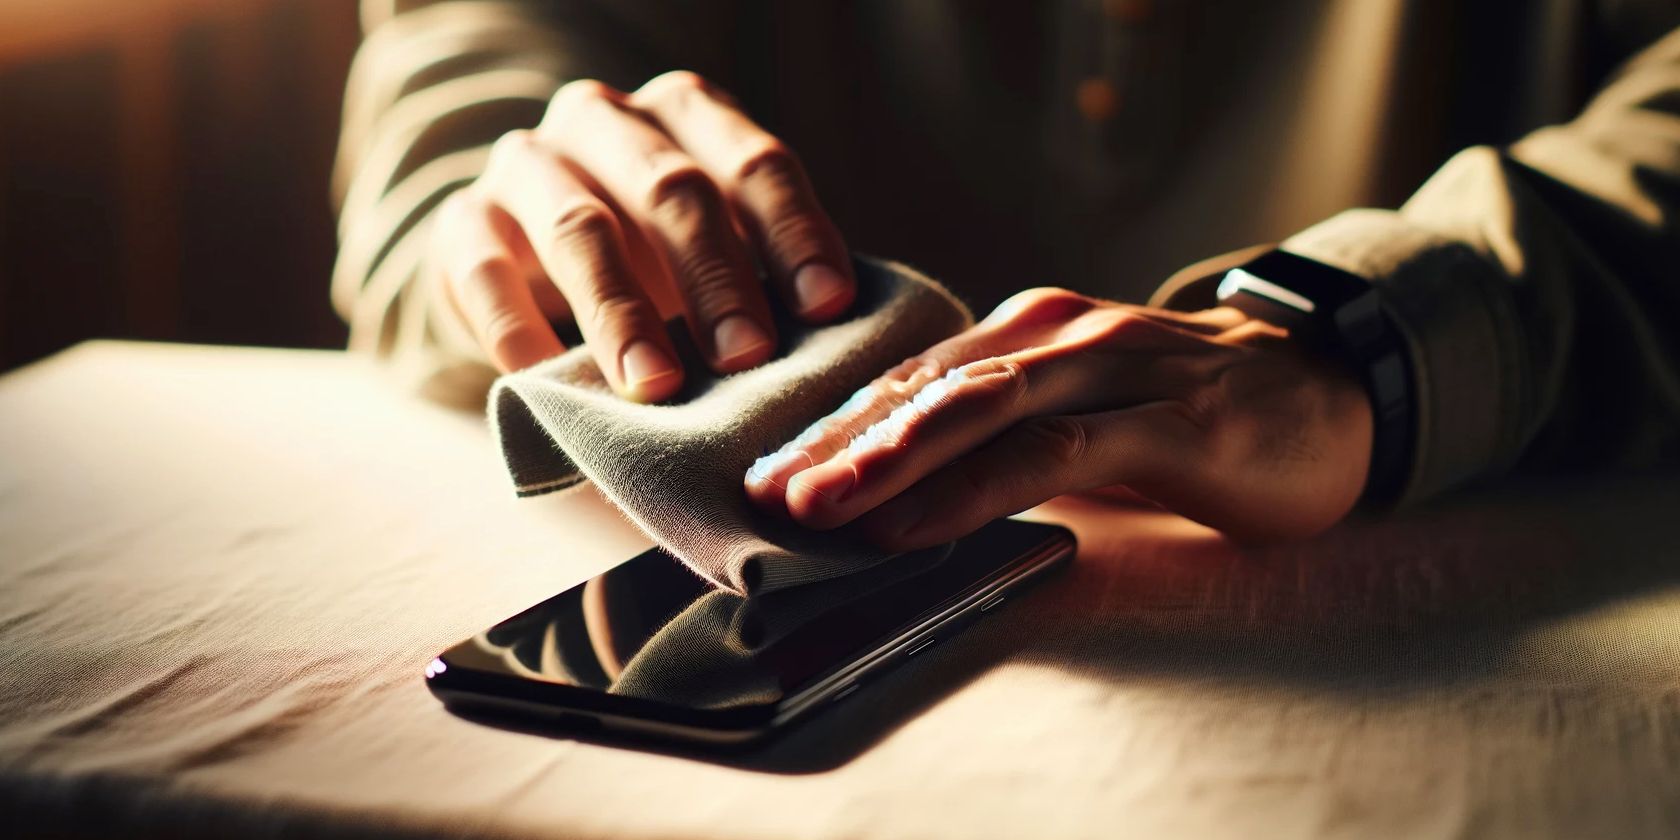 person cleaning smartphone using microfibre cloth